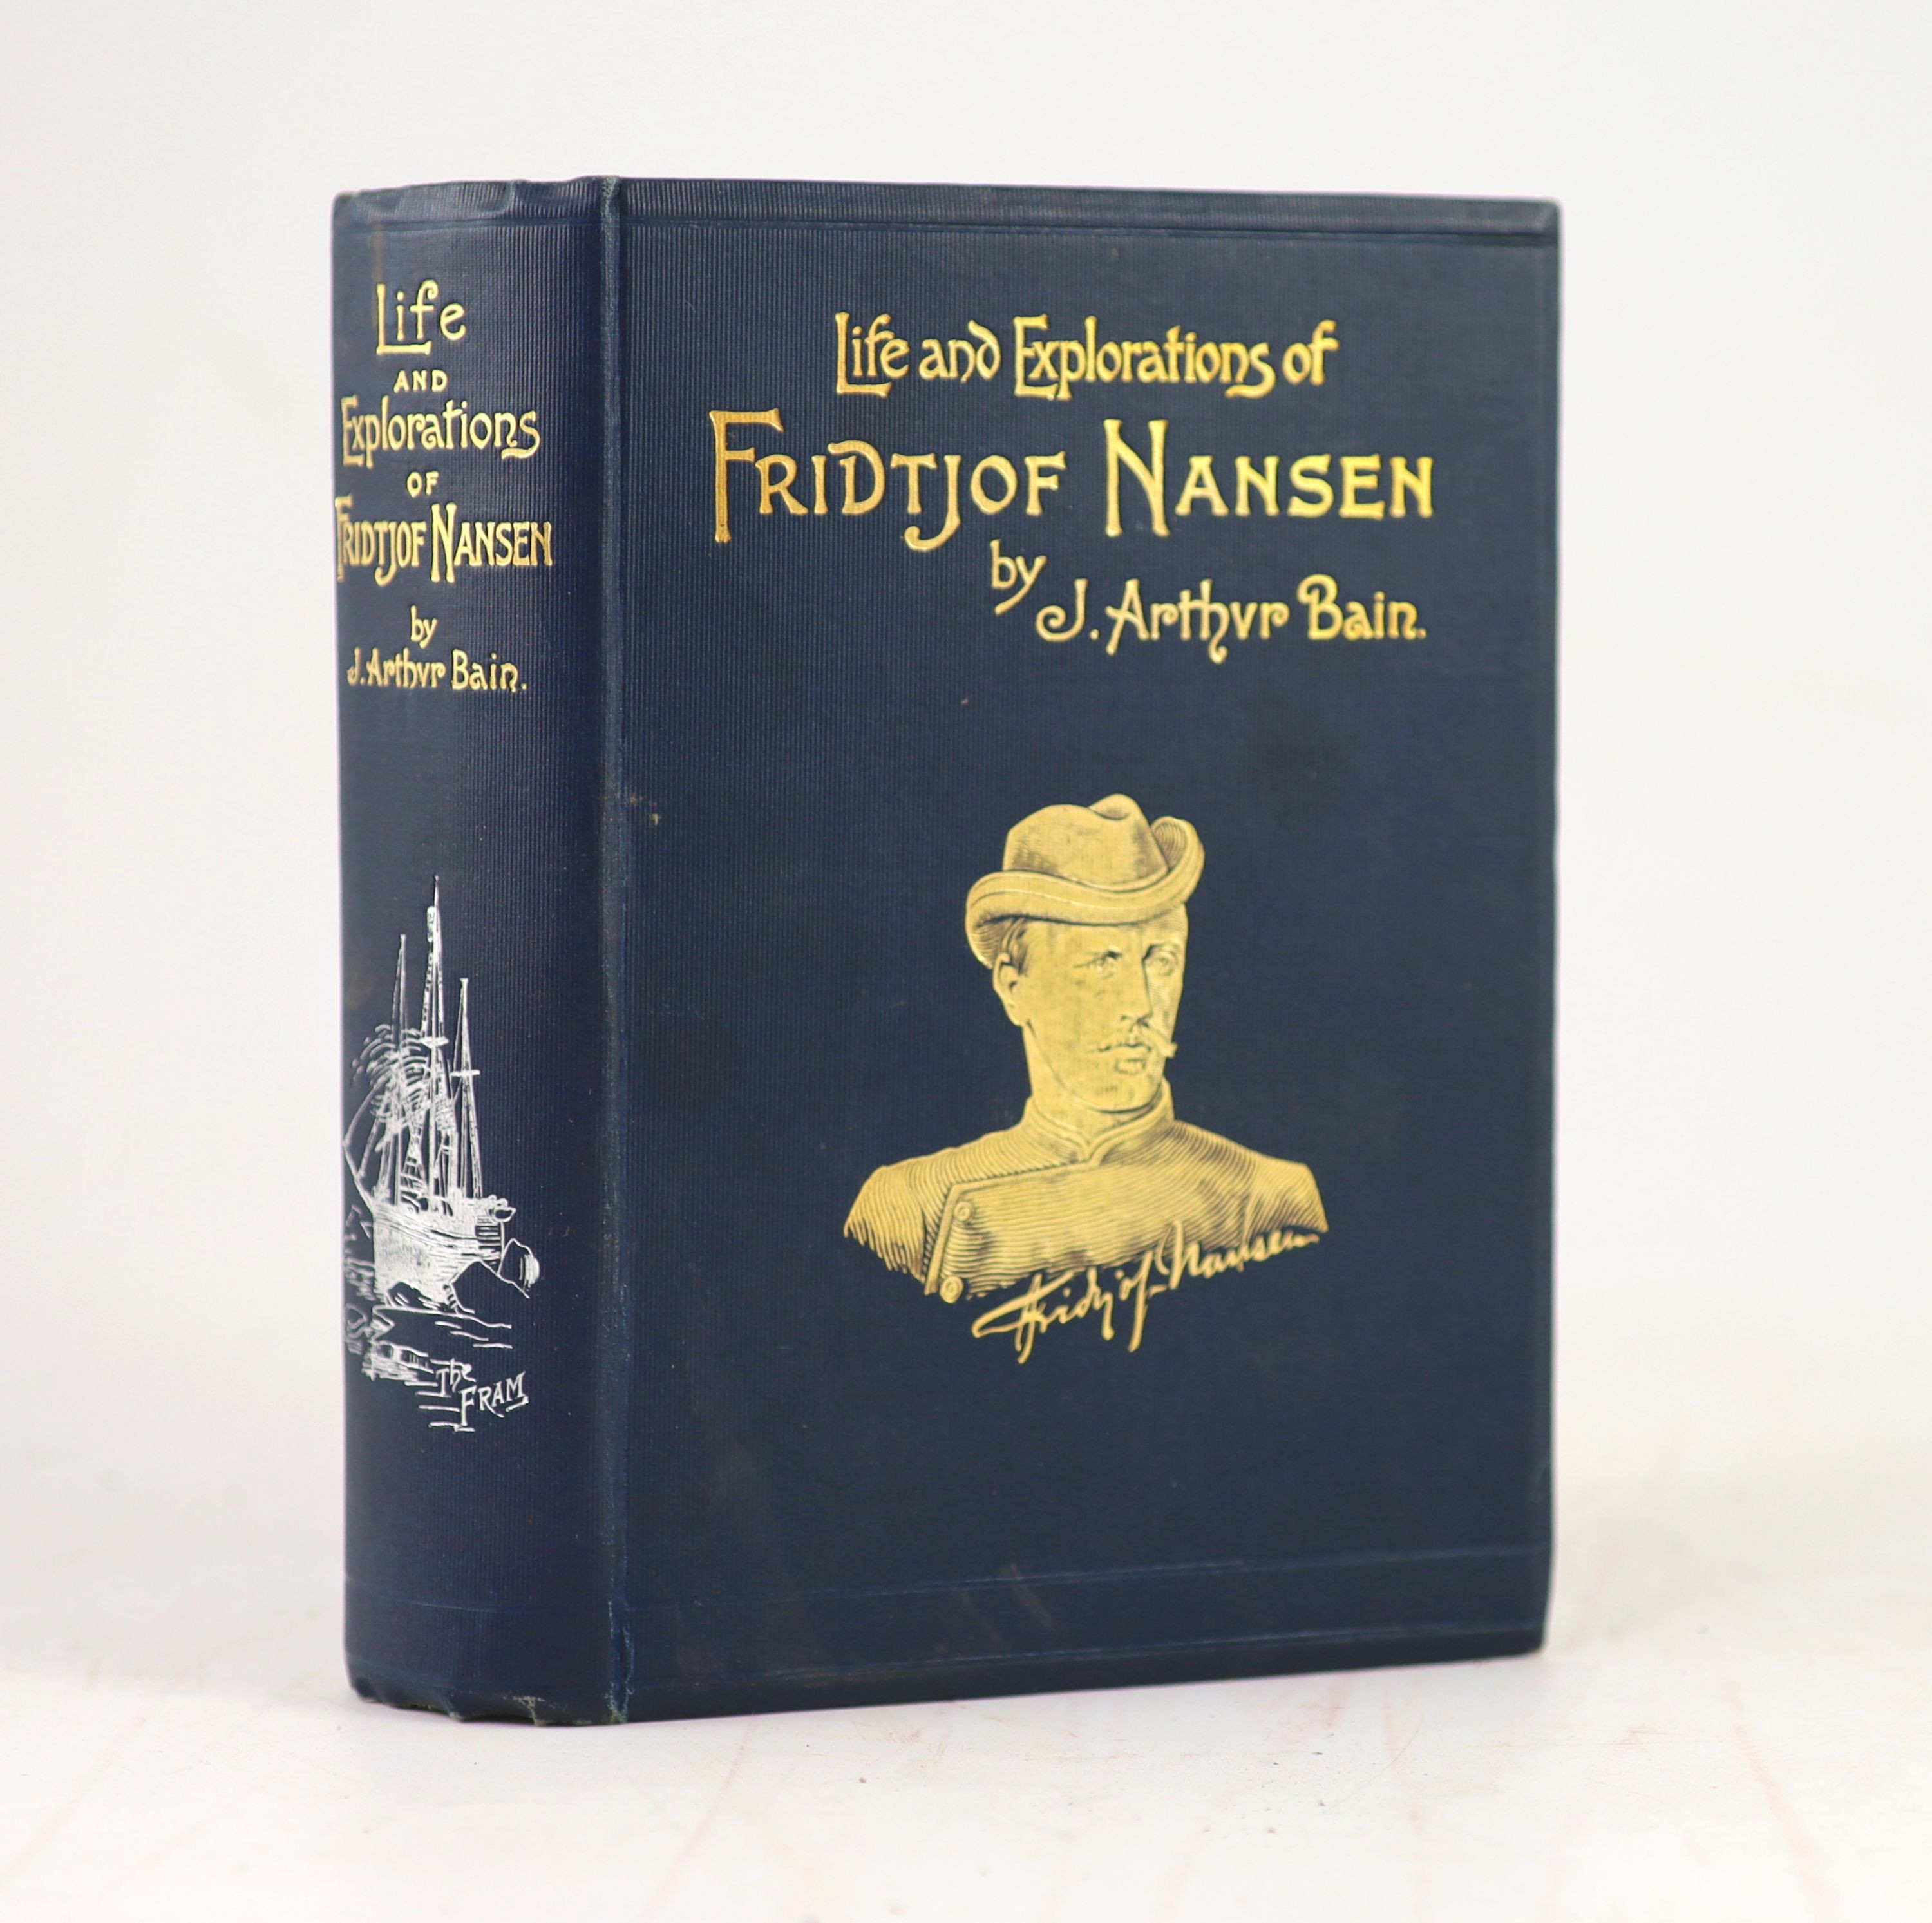 Bain, J. Arthur - Life and Explorations of Fridtjof Nansen. New edition revised and considerably enlarged. Complete with 15 engraved plates and numerous text illustrations, including 1 map. Embossed cloth with gilt portr